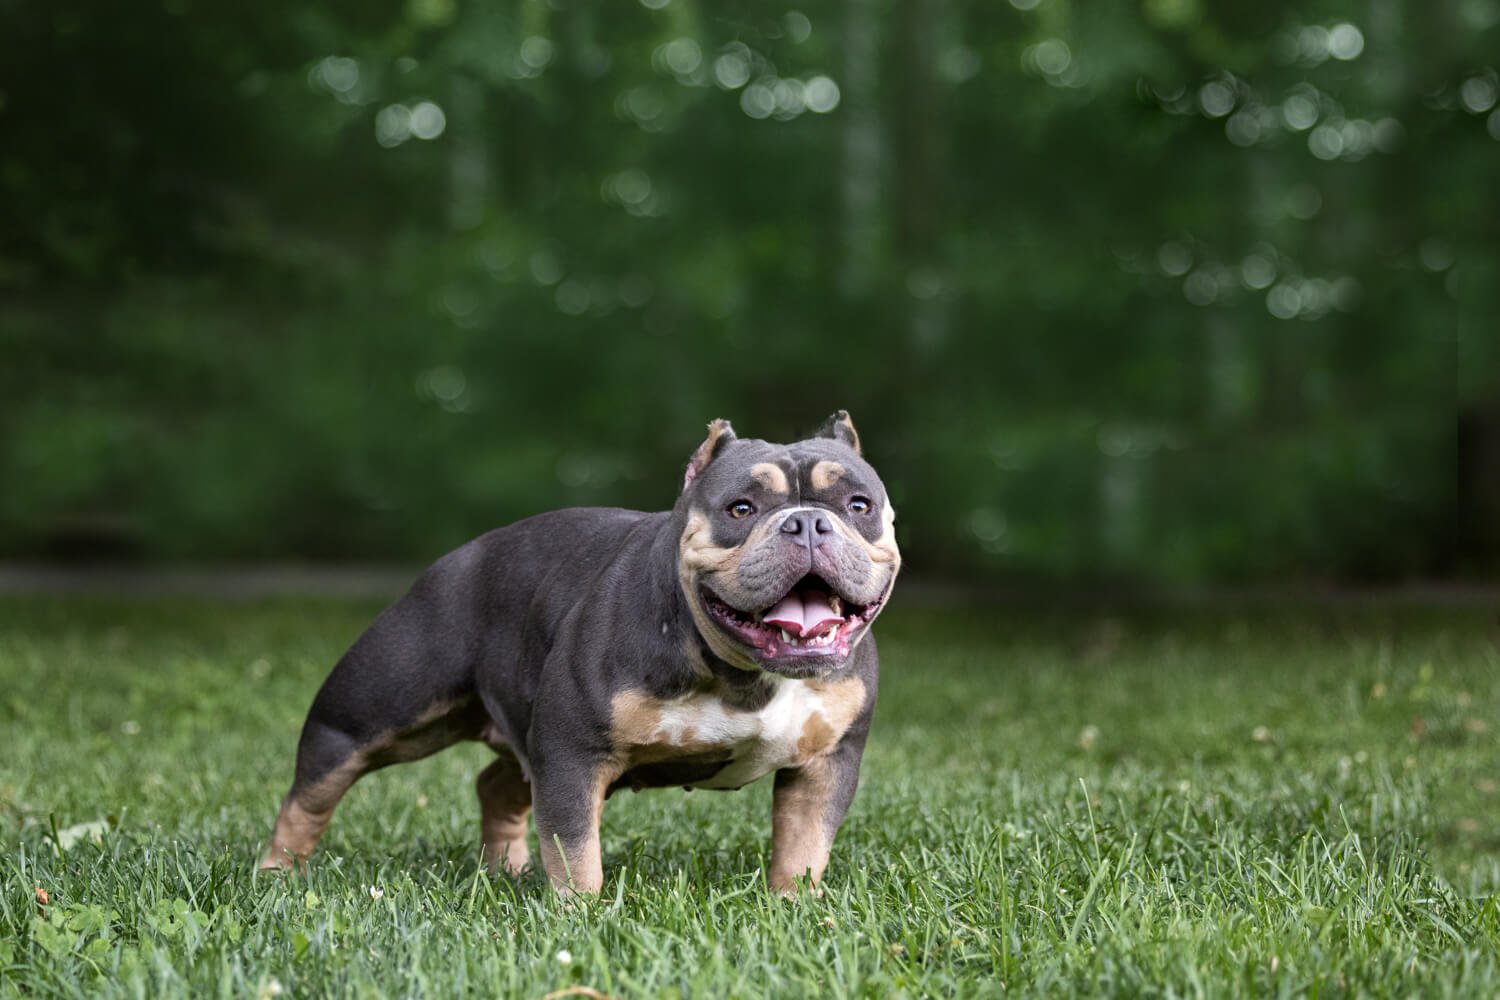 American Bullies Looking For Their New Home in Vaughan, Ontario - Hoobly  Classifieds